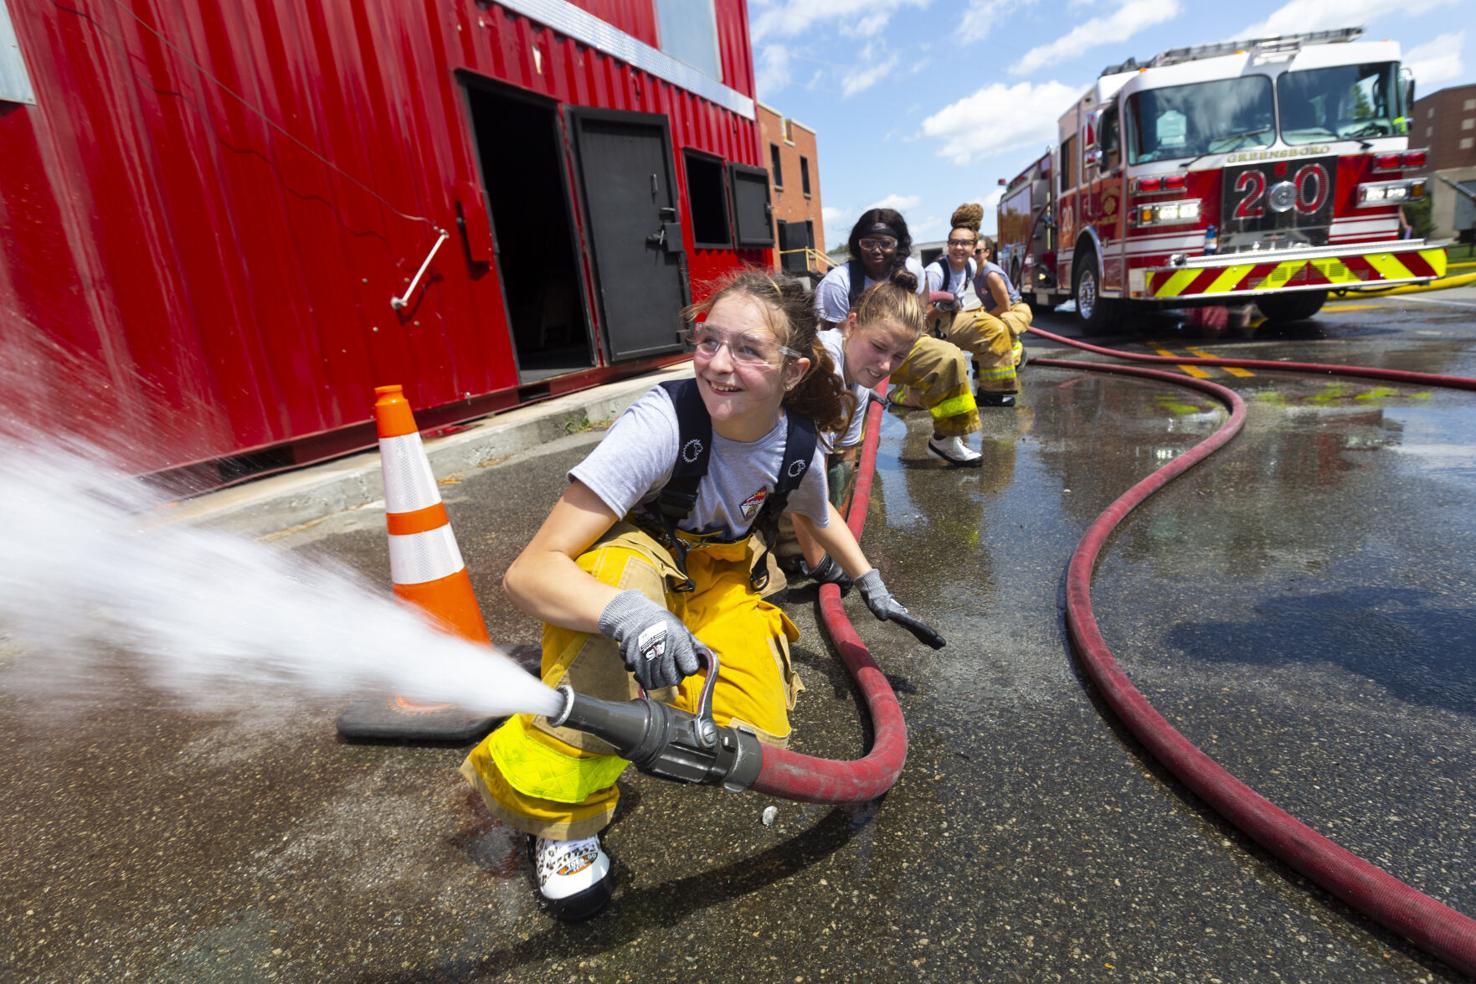 Greensboro Fire Department's Camp Spark aims to inspire girls to enter